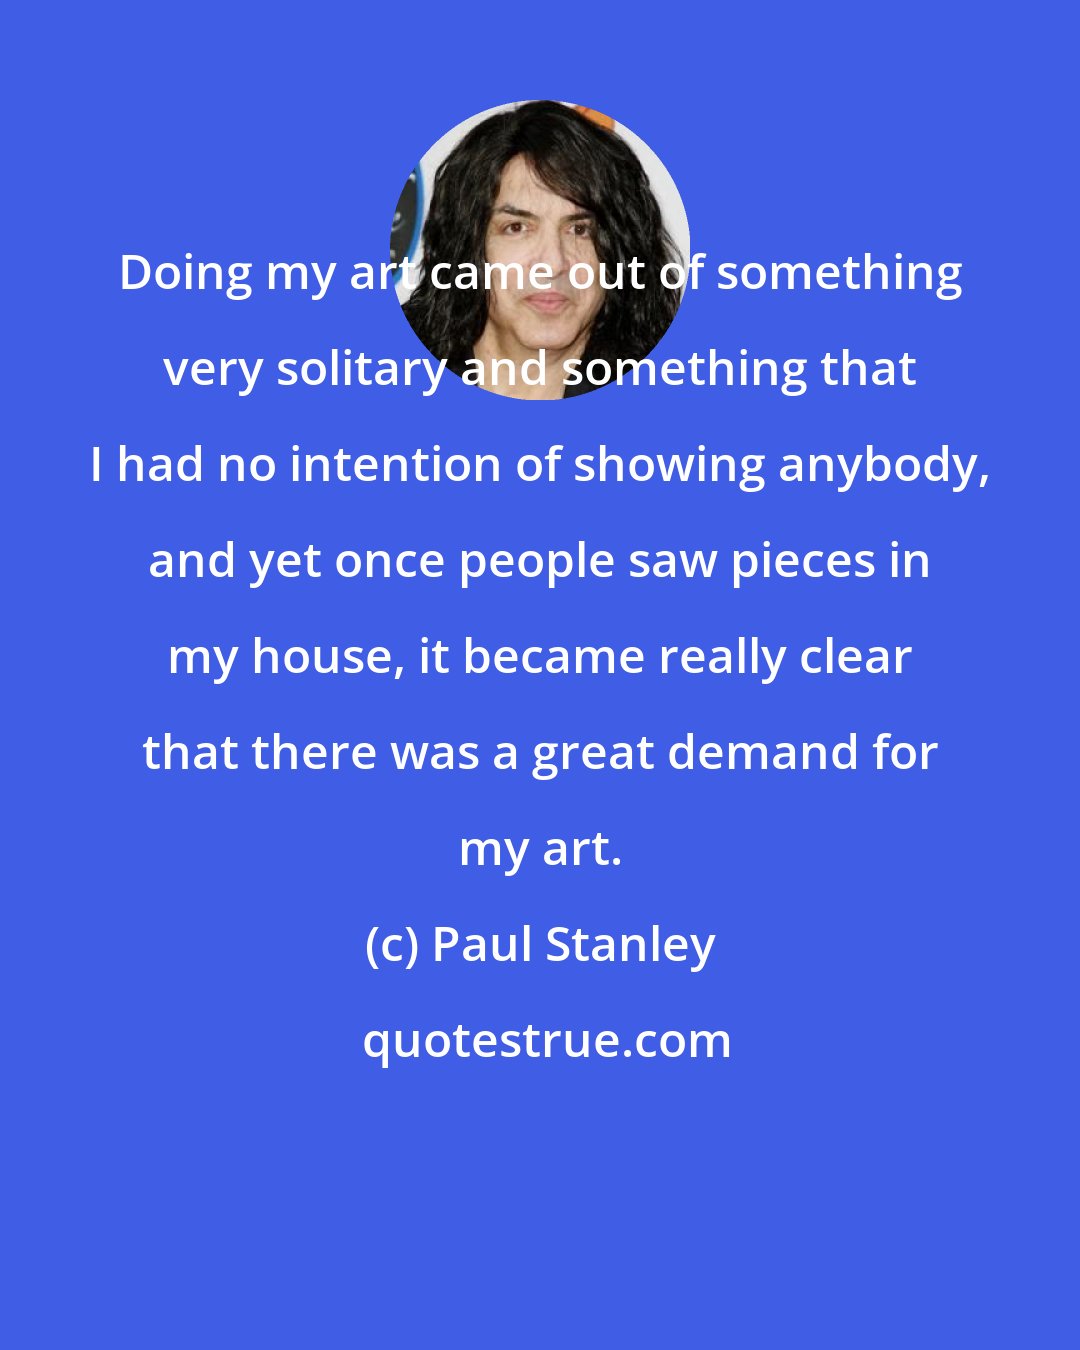 Paul Stanley: Doing my art came out of something very solitary and something that I had no intention of showing anybody, and yet once people saw pieces in my house, it became really clear that there was a great demand for my art.